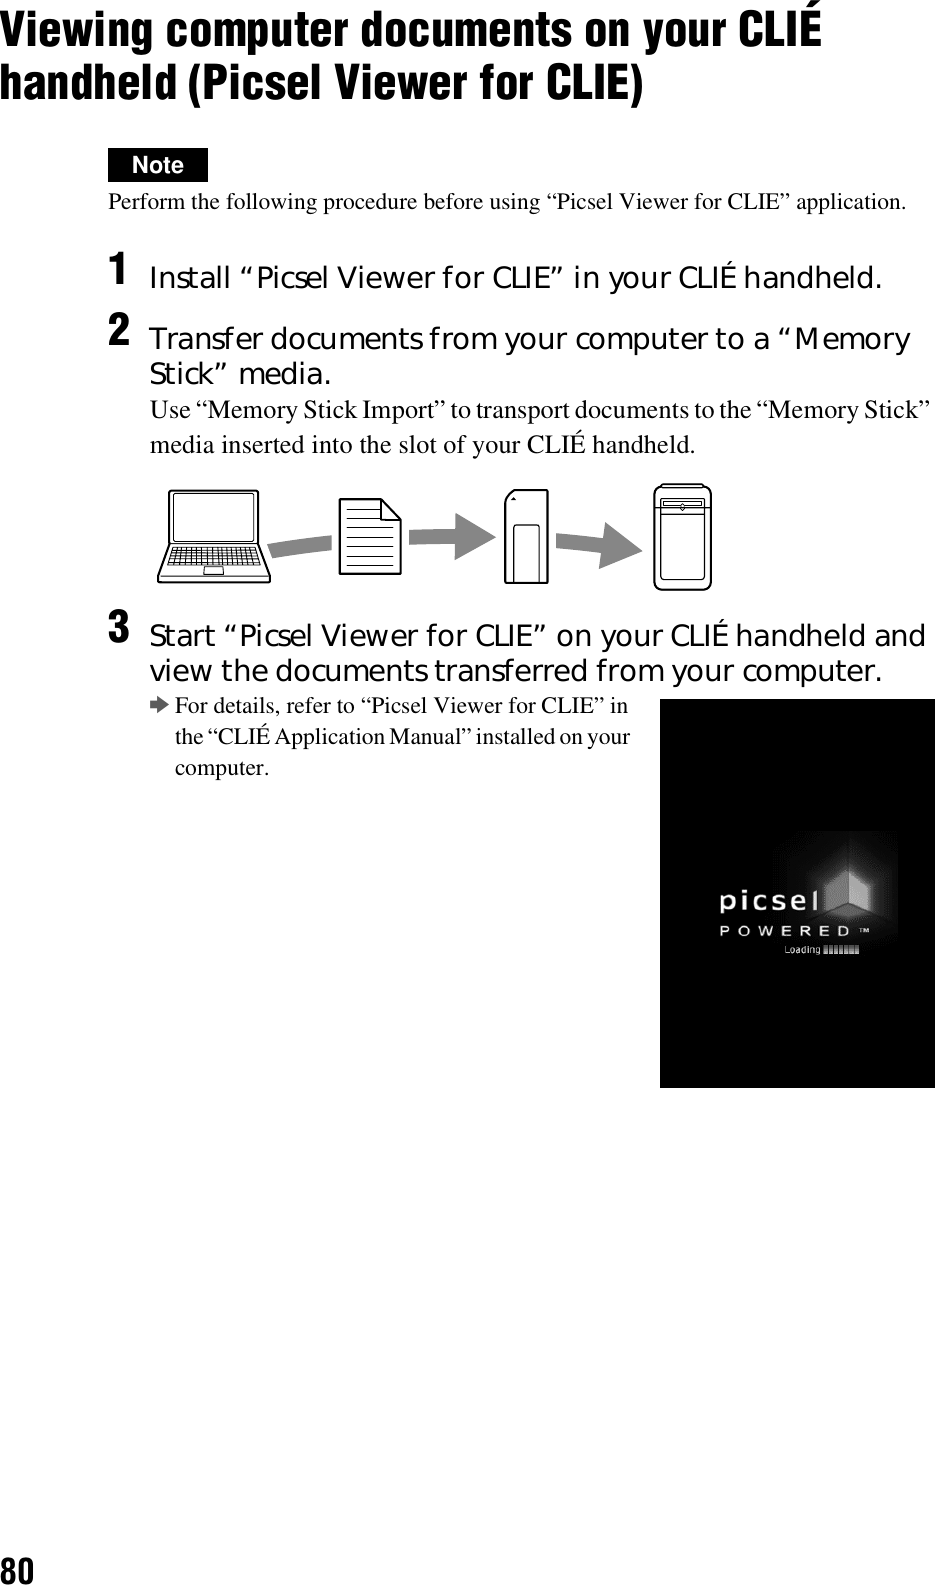 80Viewing computer documents on your CLIÉ handheld (Picsel Viewer for CLIE)NotePerform the following procedure before using “Picsel Viewer for CLIE” application.1Install “Picsel Viewer for CLIE” in your CLIÉ handheld.2Transfer documents from your computer to a “Memory Stick” media.Use “Memory Stick Import” to transport documents to the “Memory Stick” media inserted into the slot of your CLIÉ handheld.3Start “Picsel Viewer for CLIE” on your CLIÉ handheld and view the documents transferred from your computer.bFor details, refer to “Picsel Viewer for CLIE” in the “CLIÉ Application Manual” installed on your computer.